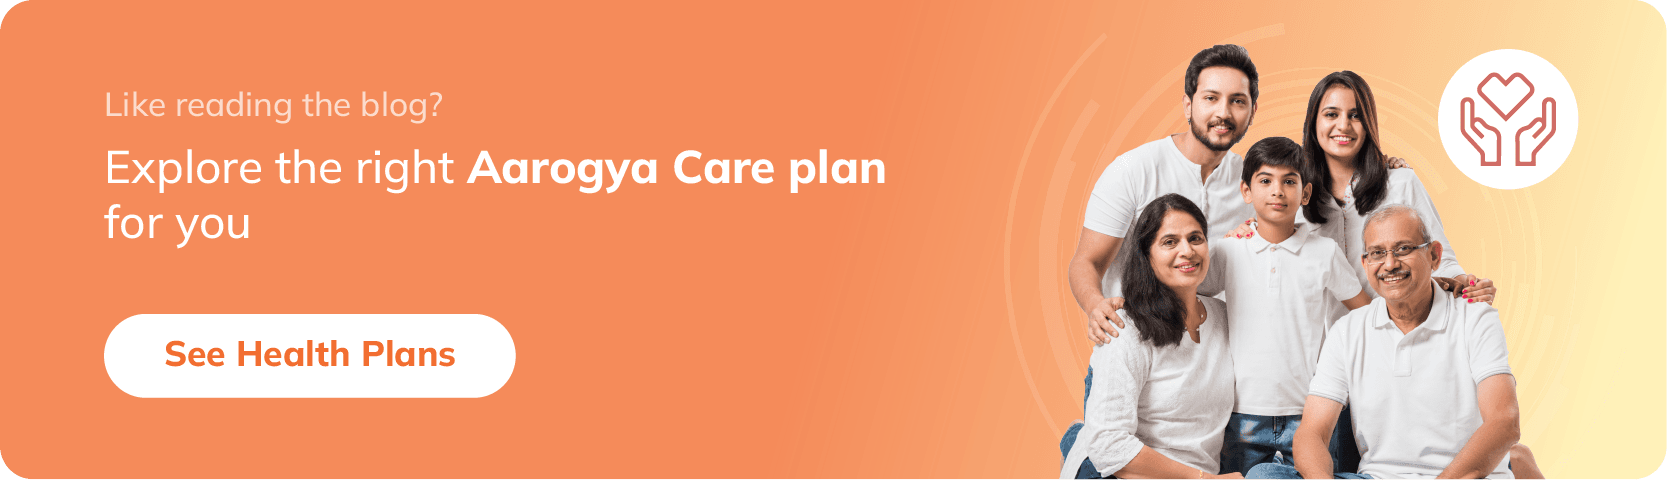 Want Personalized Health Plan? Choose Aarogya Care! banner